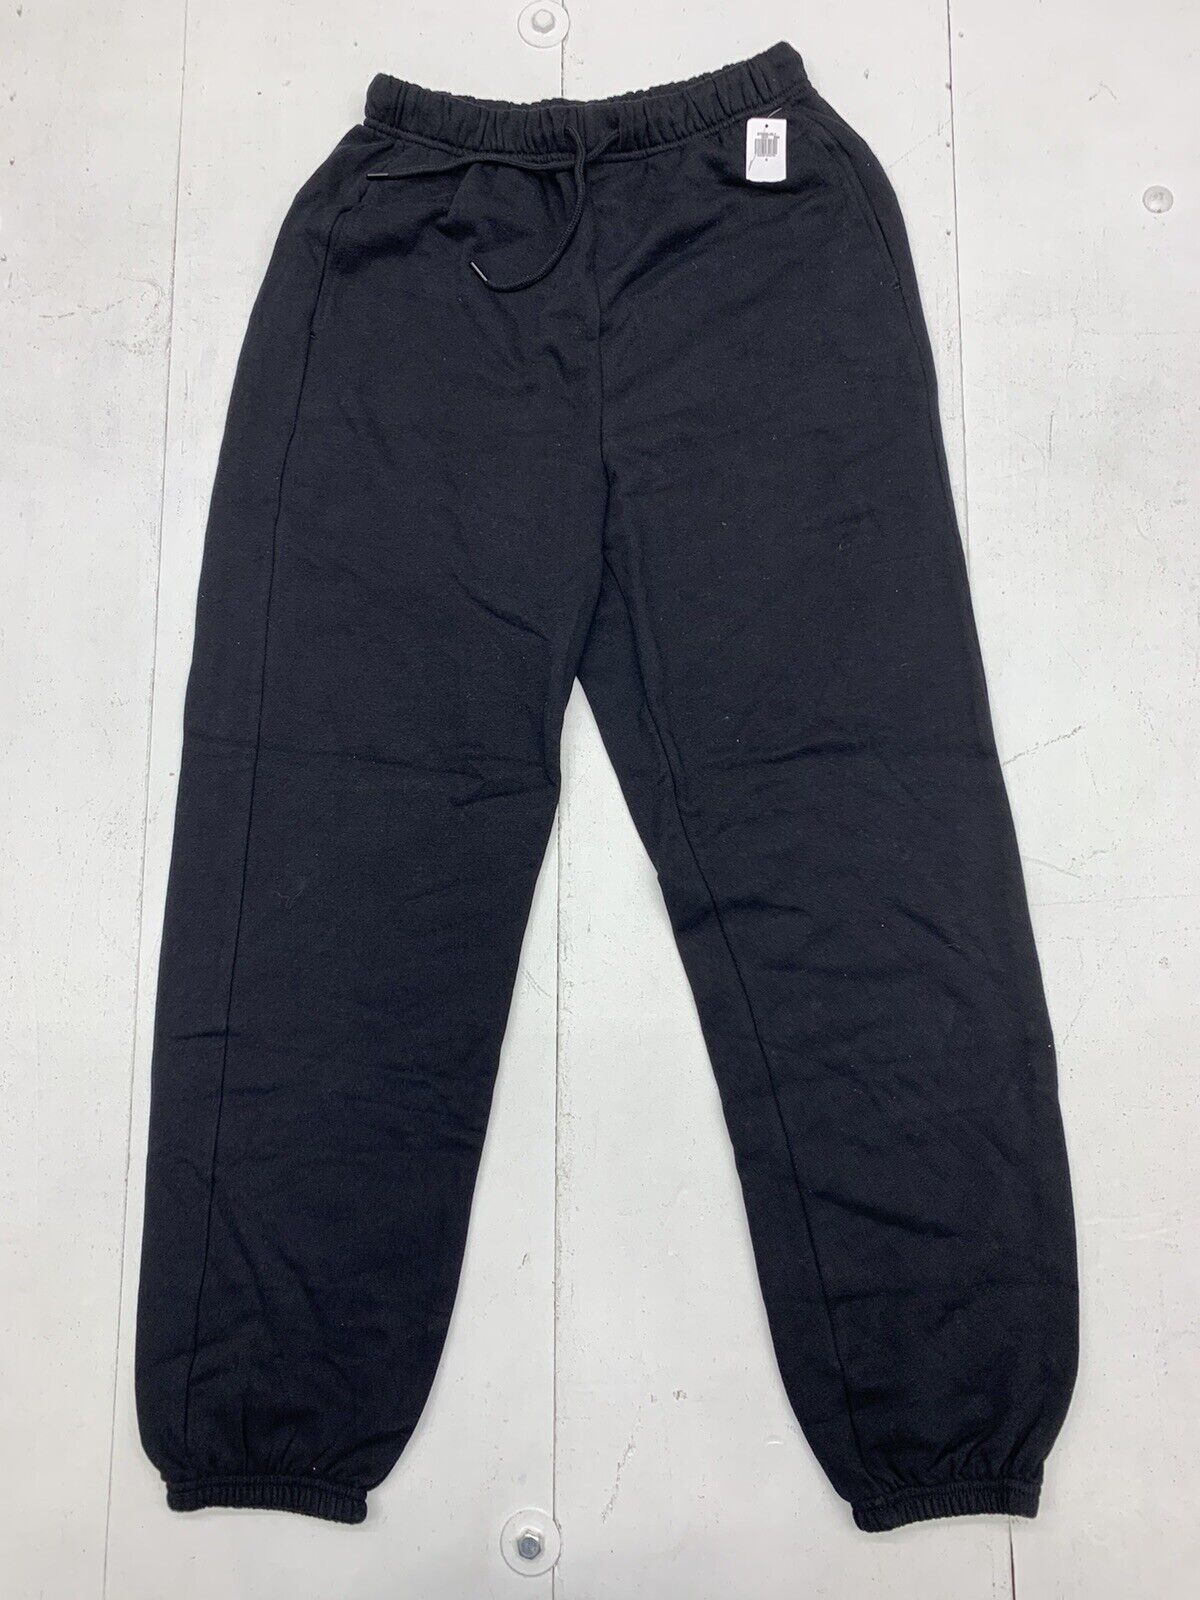 Old Navy Mens Black Sweatpants Size Small - beyond exchange